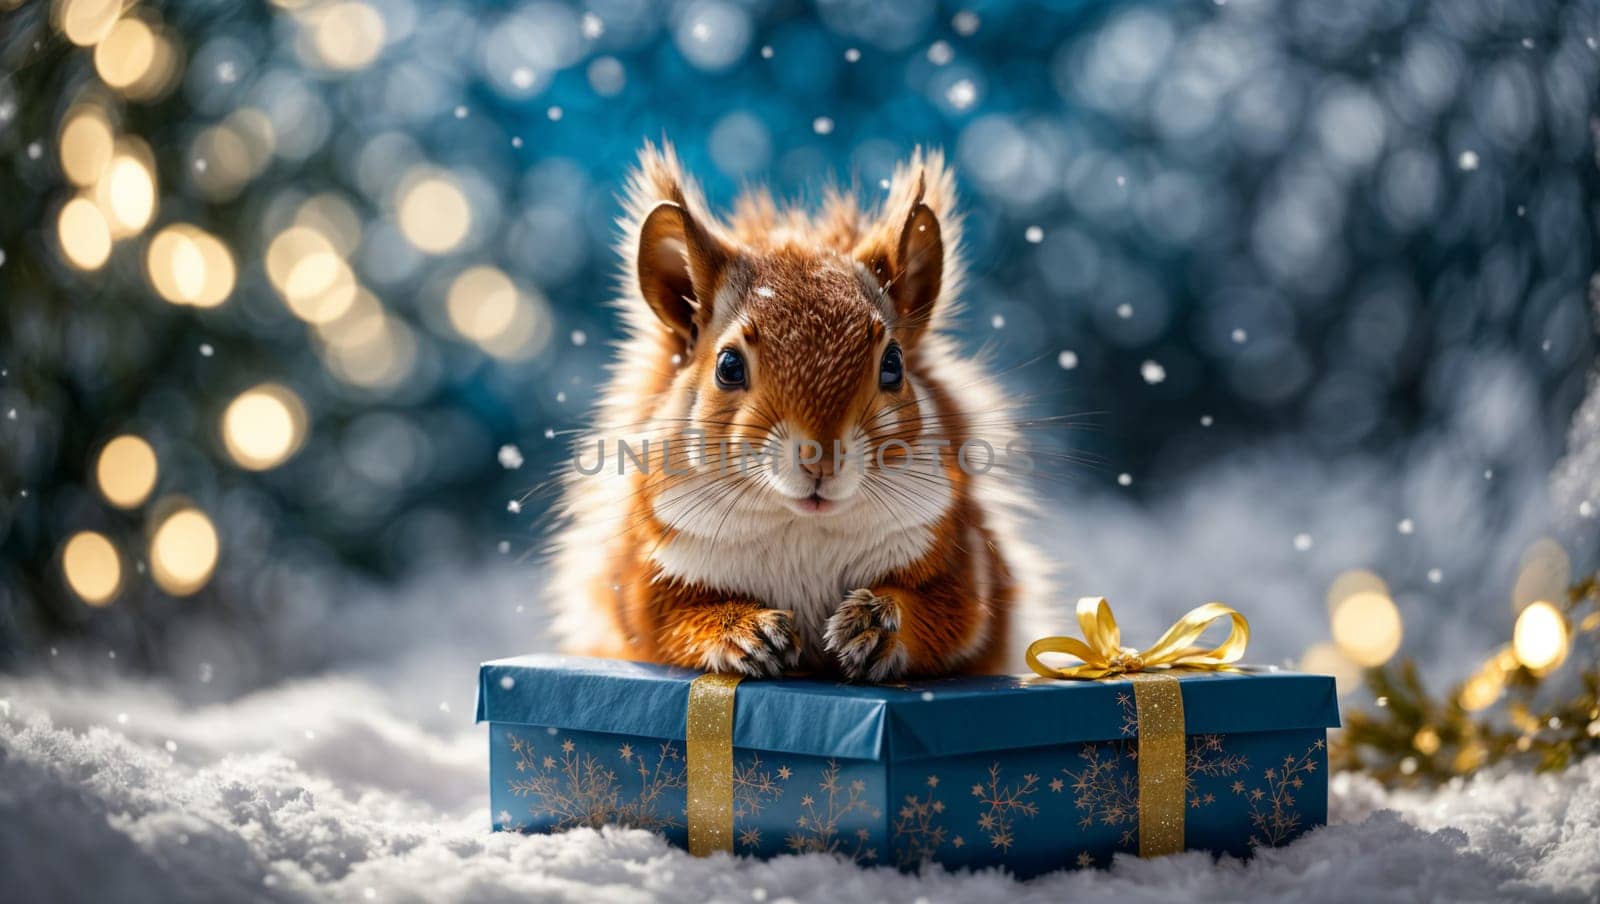 Fluffy squirrel with a New Year's gift on a New Year's background by Севостьянов